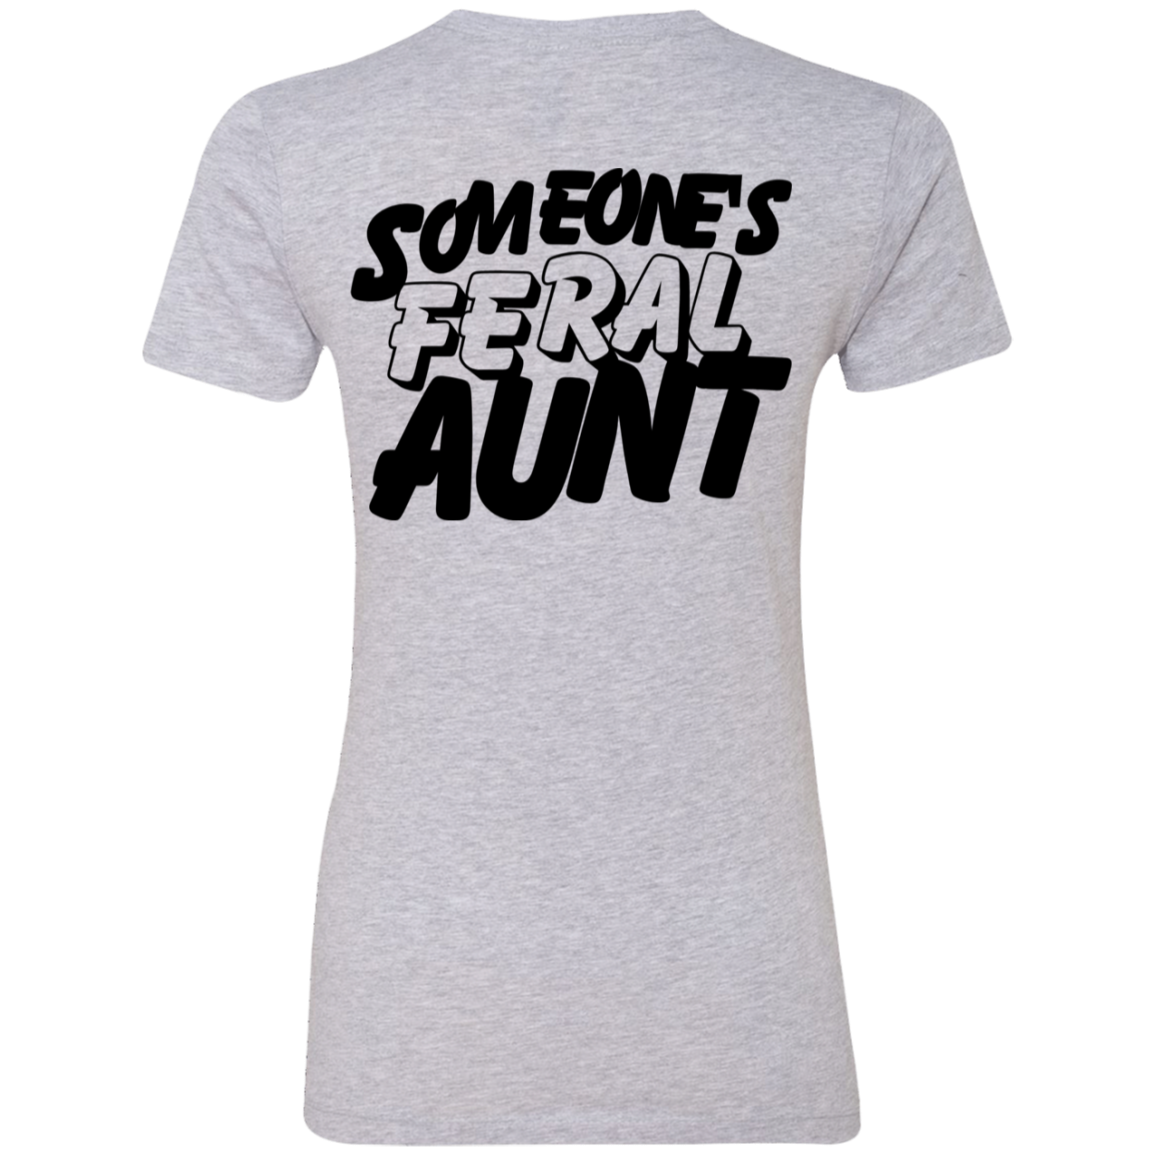 Someone's Feral Aunt Tee